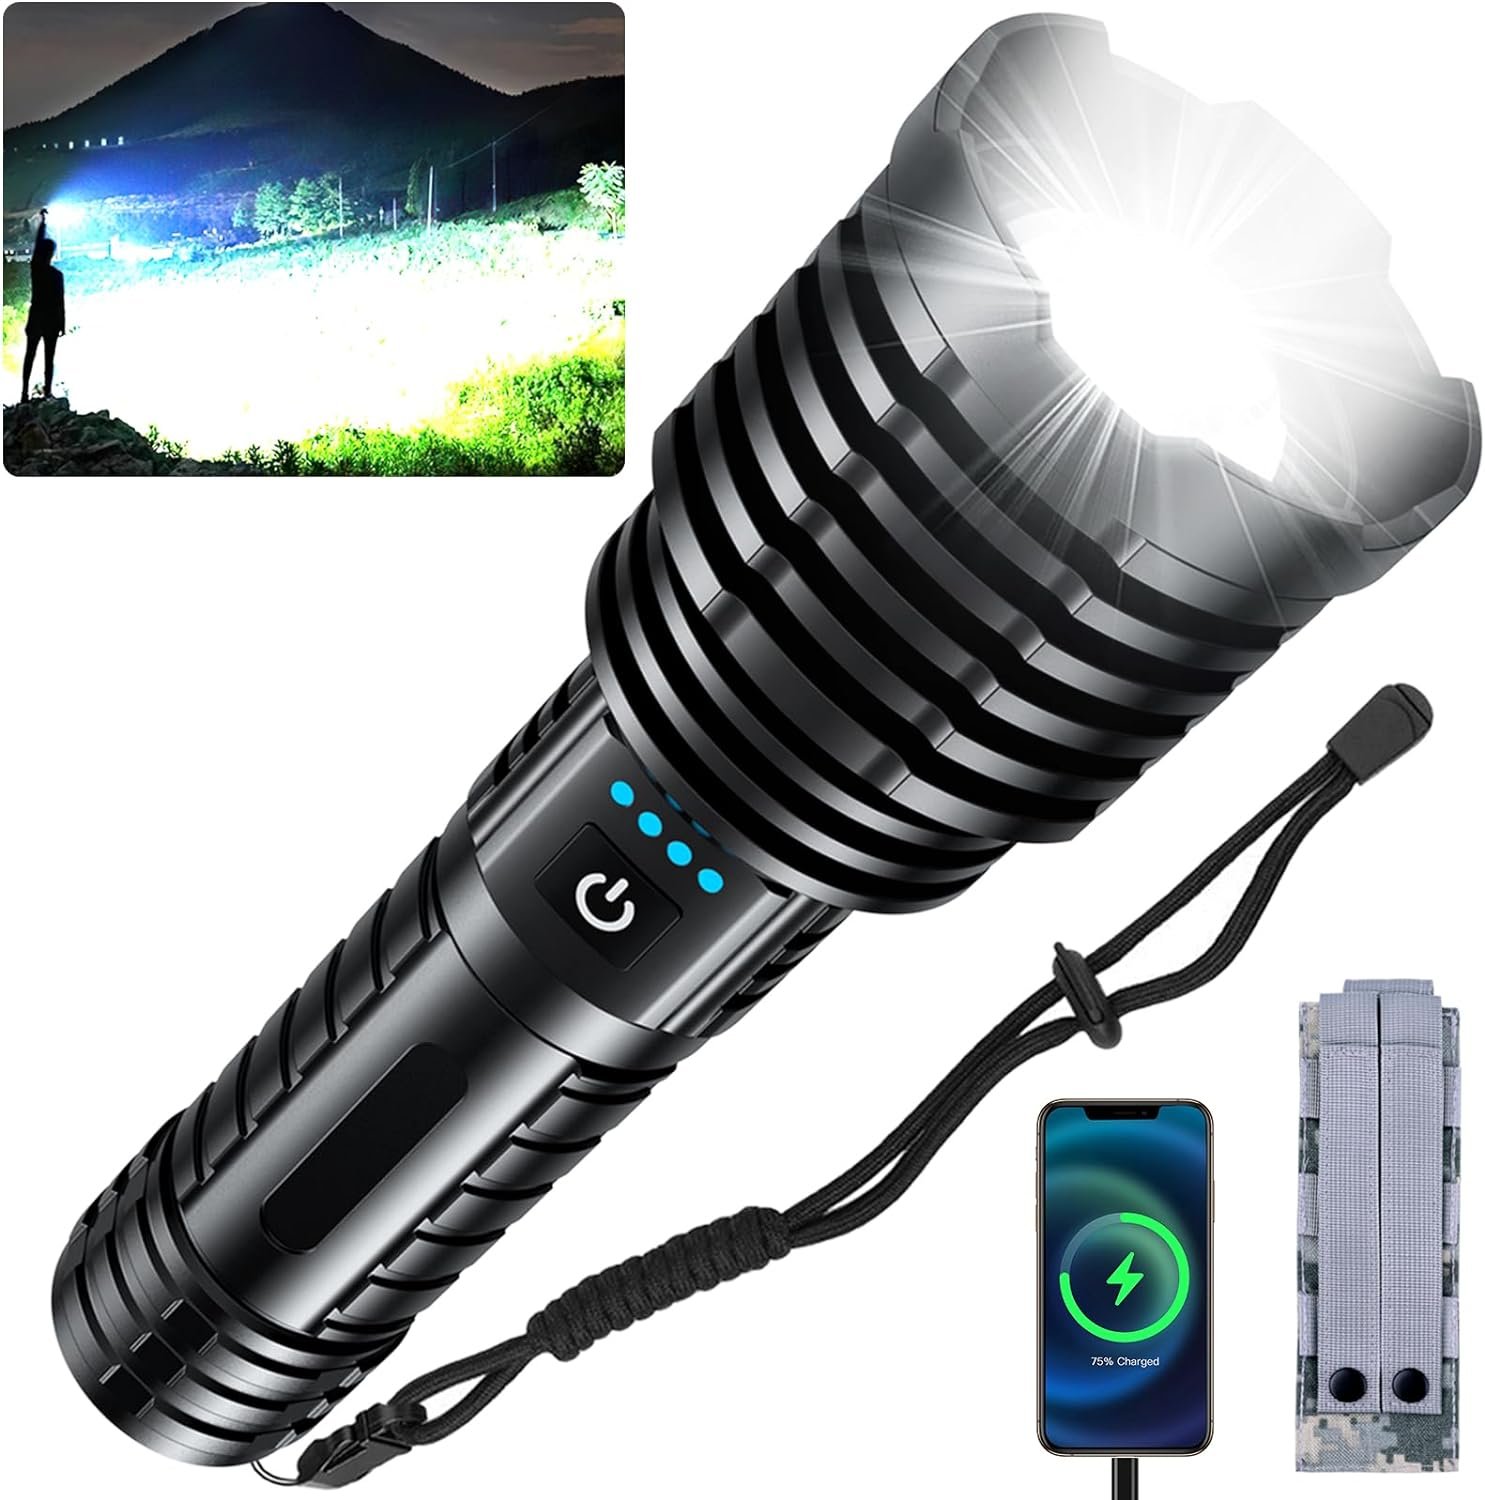 Super Bright LED Flashlight 300000 High Lumens, Rechargeable Handheld Flashlights Powered by Battery, Powerful Waterproof Tactical Flashlights with Zoomable 6 Modes for Emergencies Camping (Black)